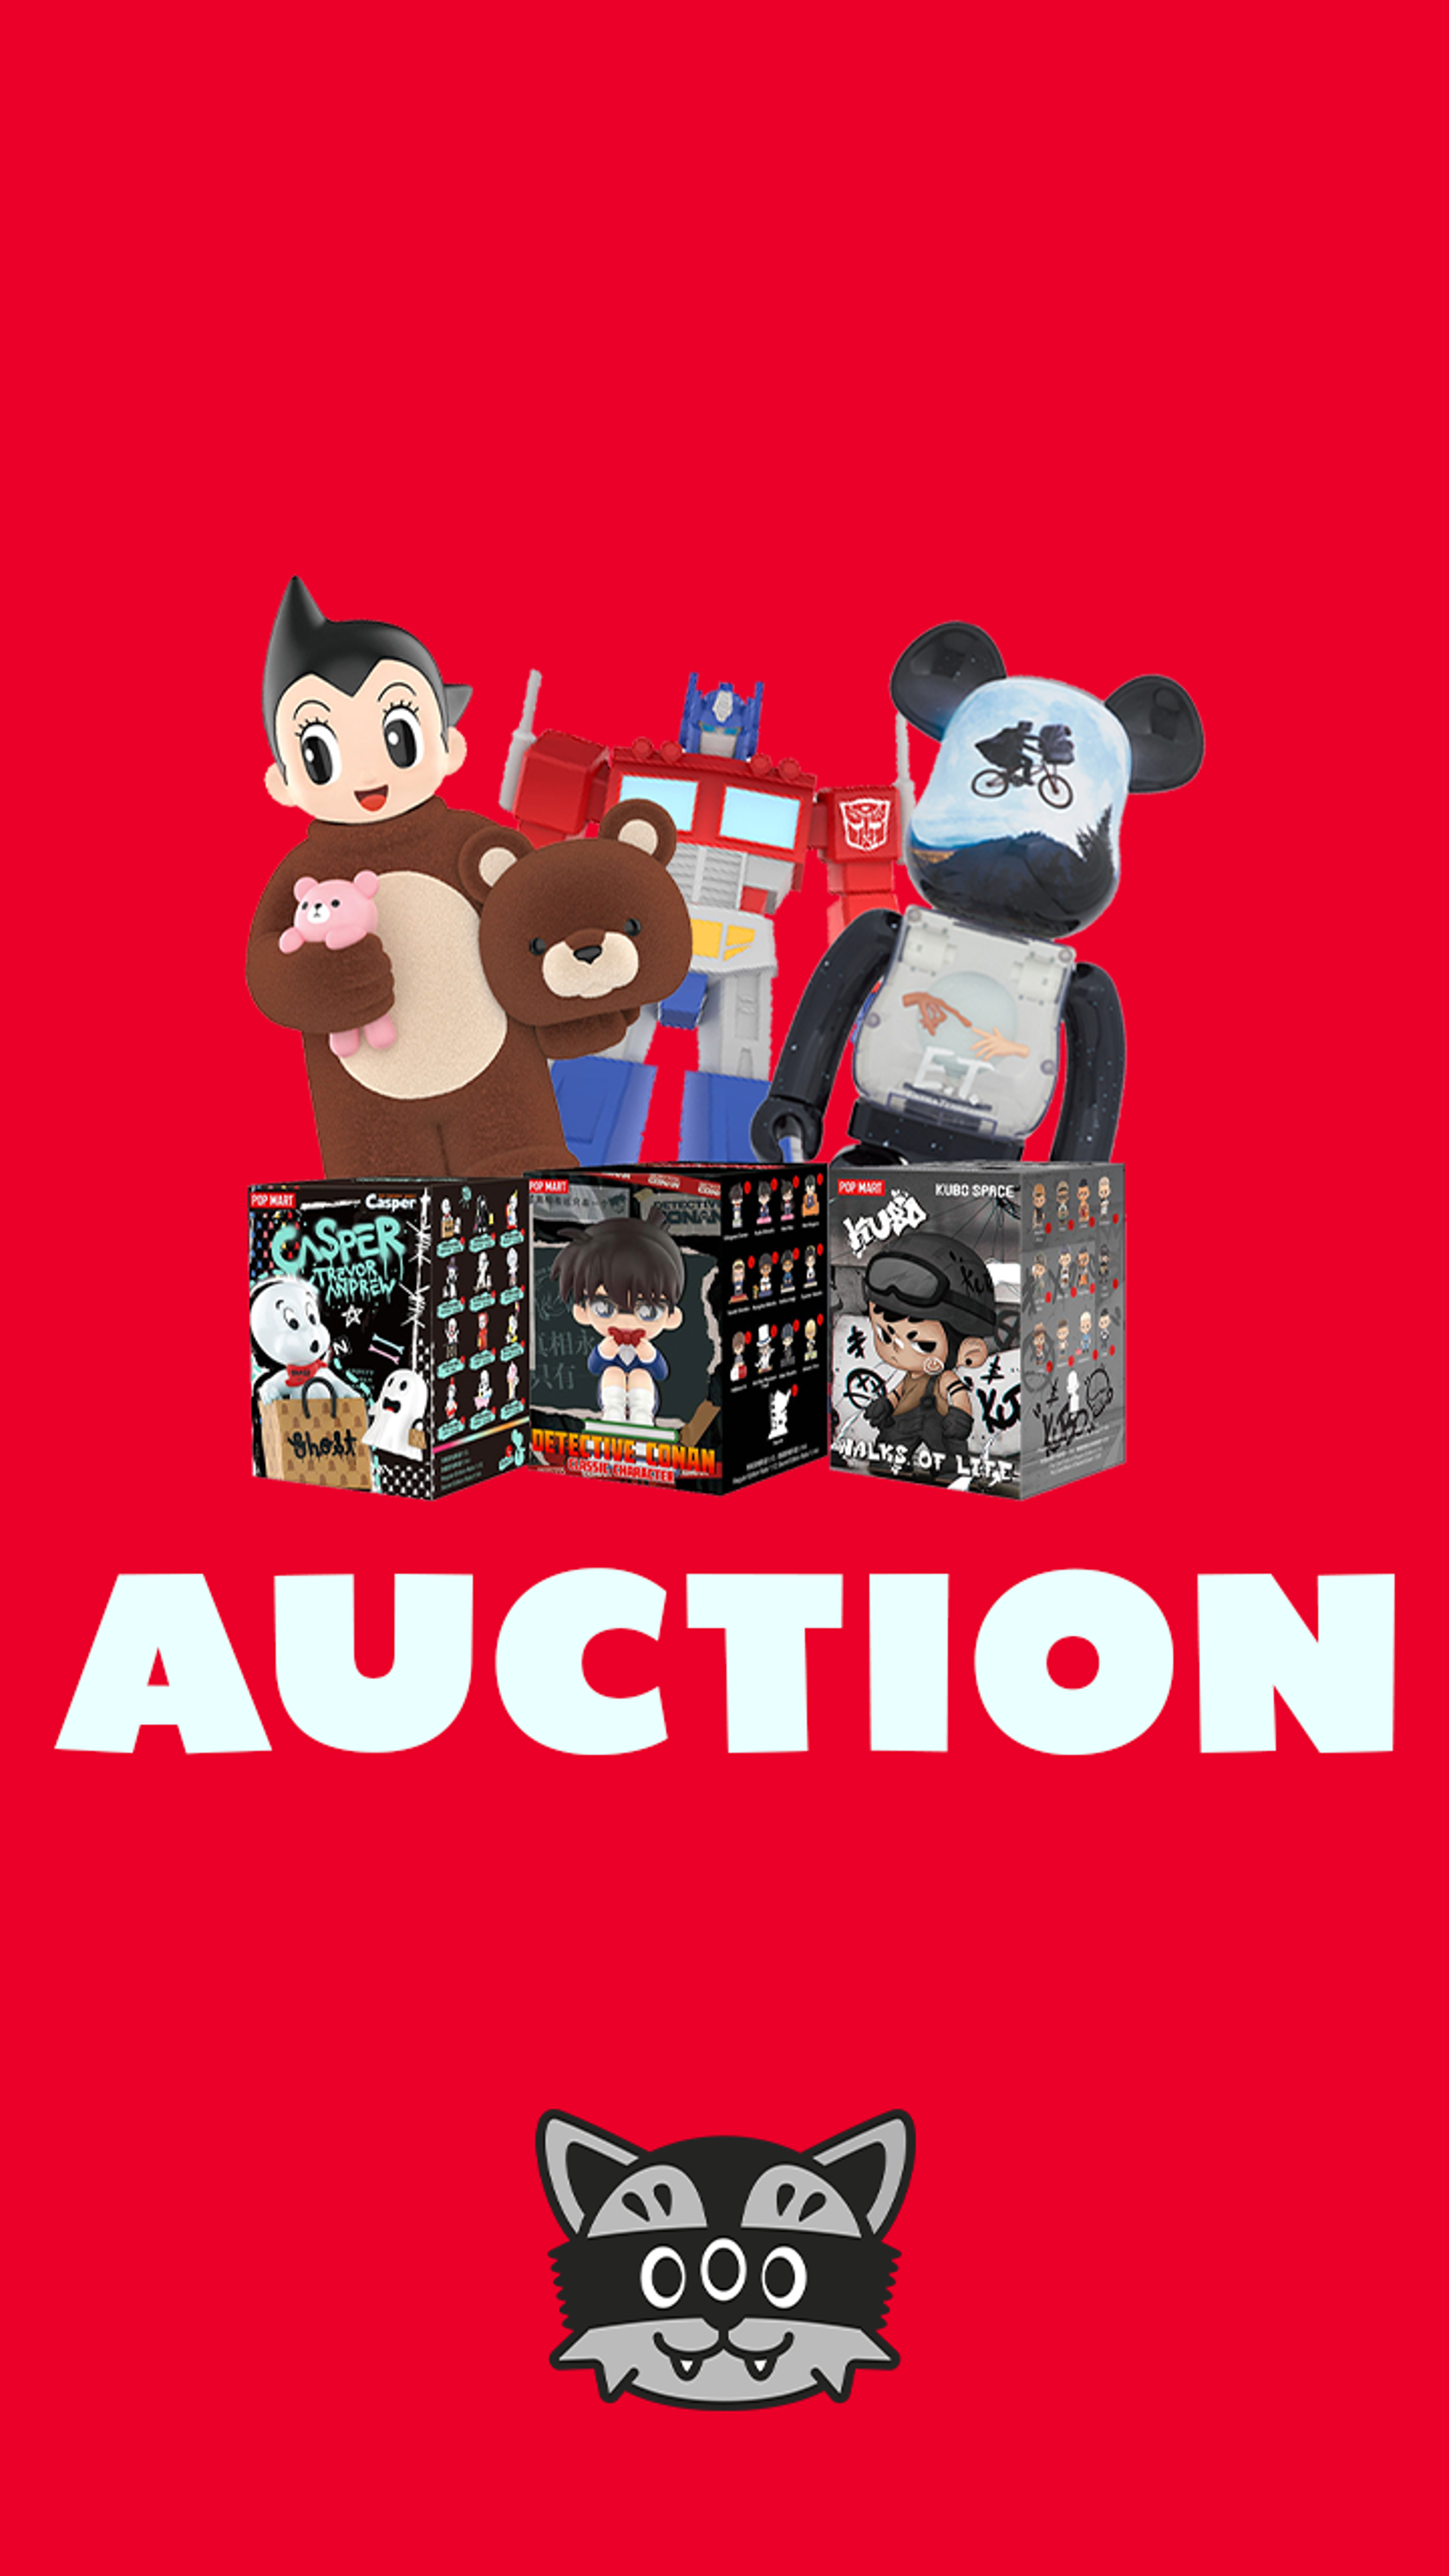 Preview image for the show titled "Mindzai Auction - April 30" at Tuesday @ 5:00 PM